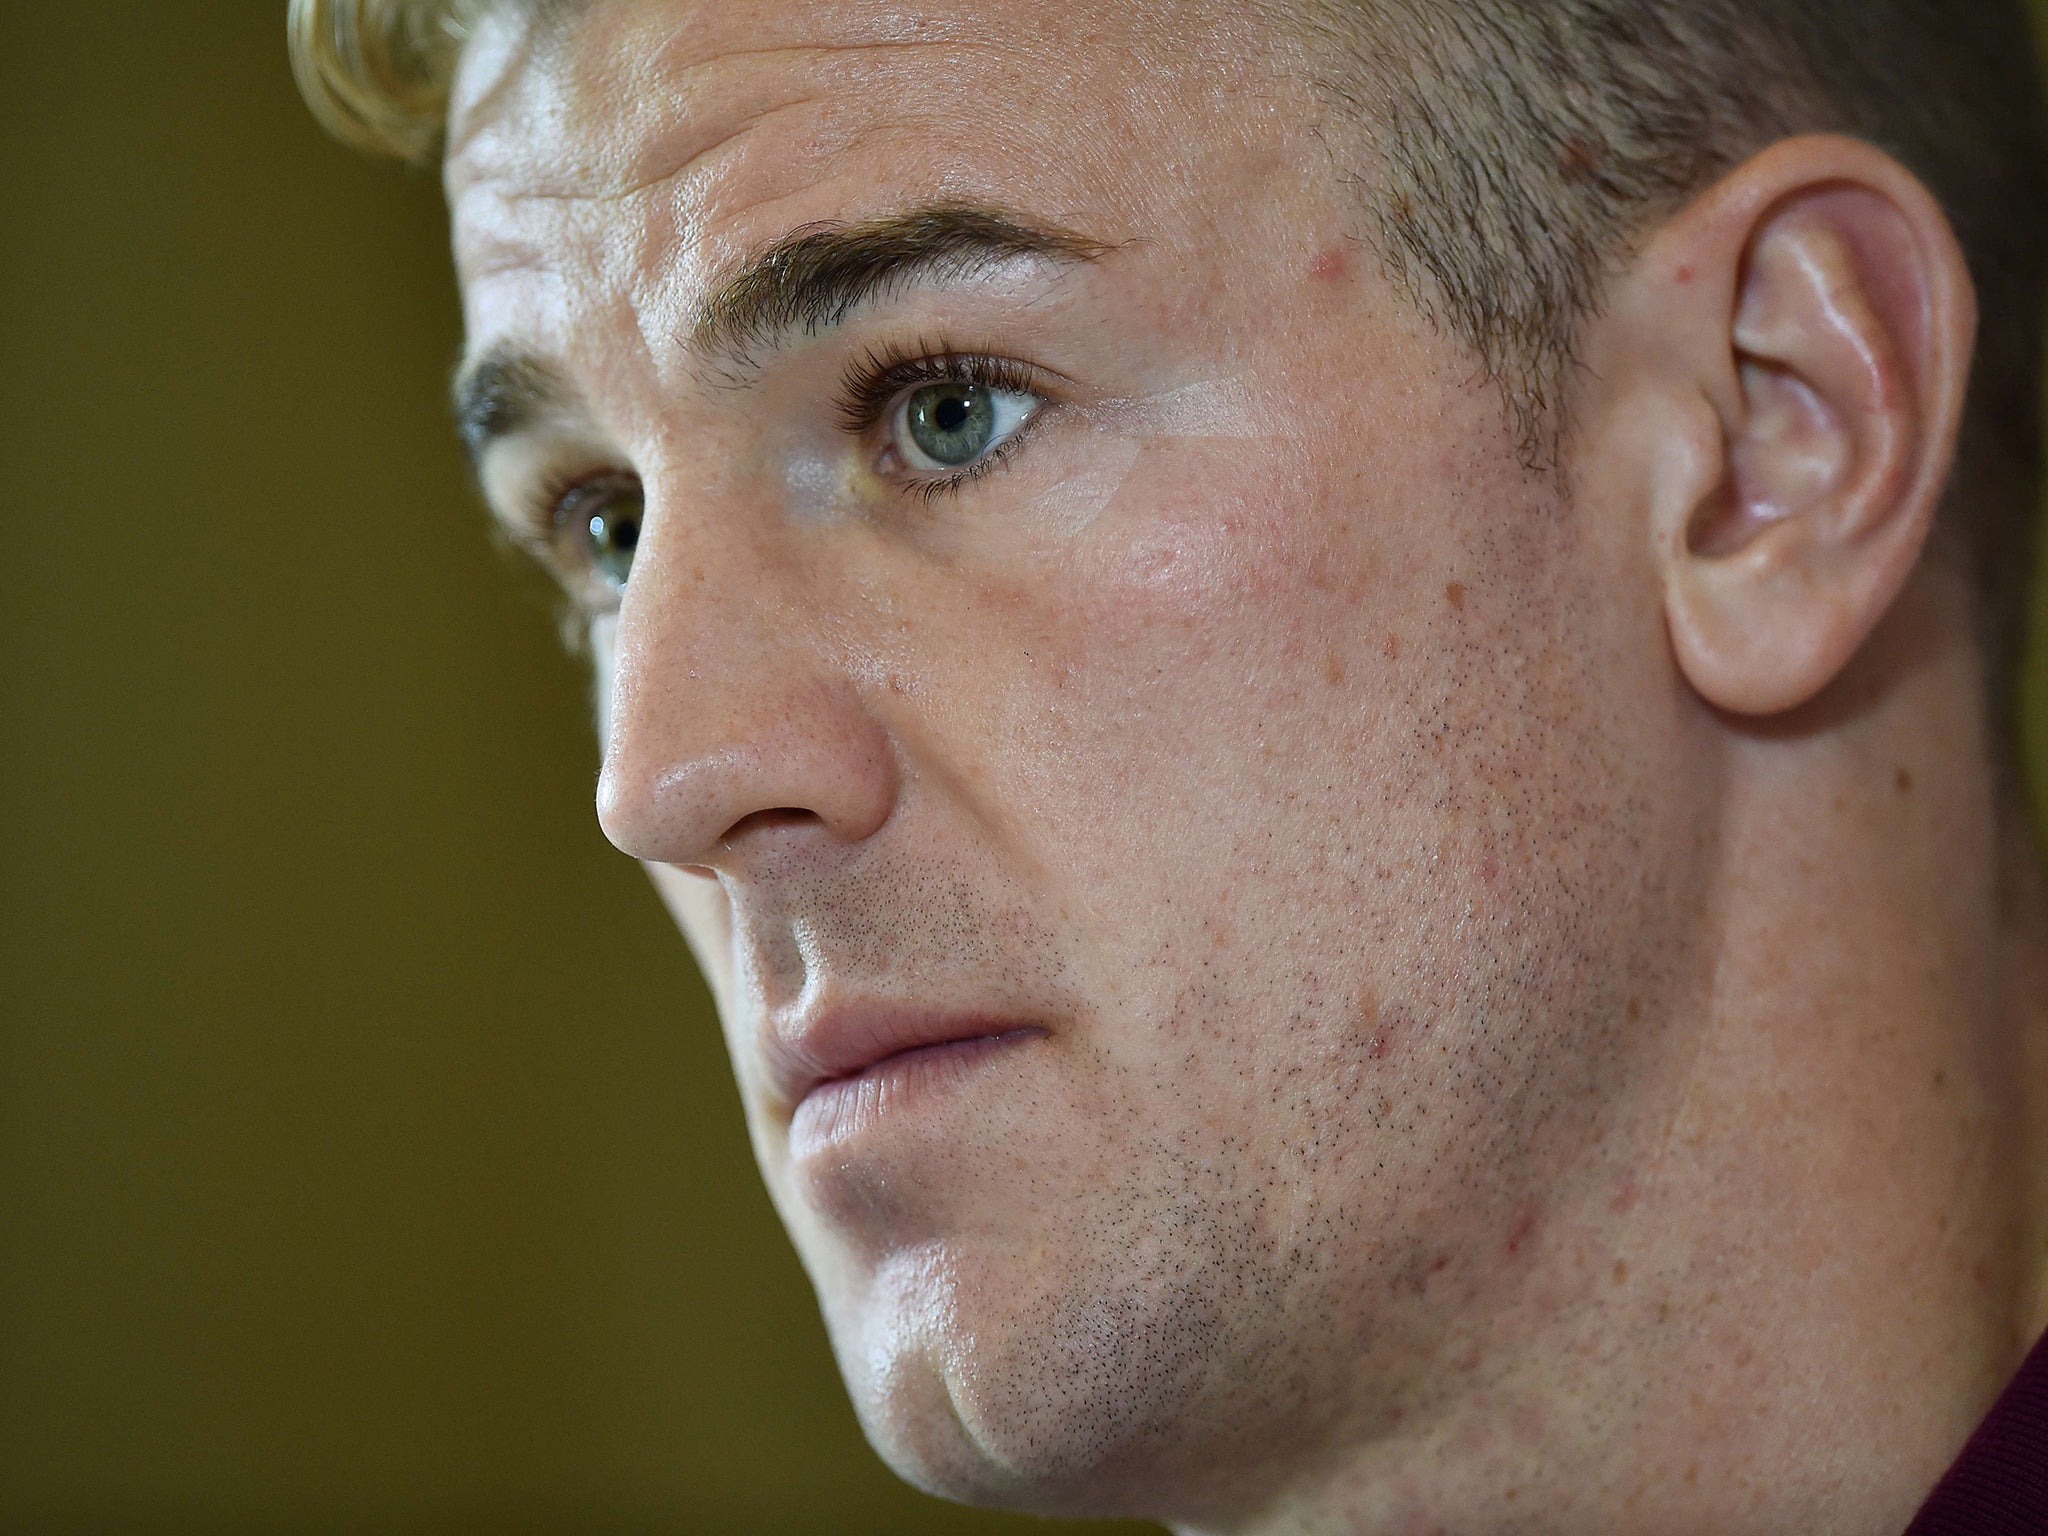 Joe Hart: 'We need to beat Slovenia, keep an unbeaten run and qualify as soon as possible – we have started something and we need to build the momentum'